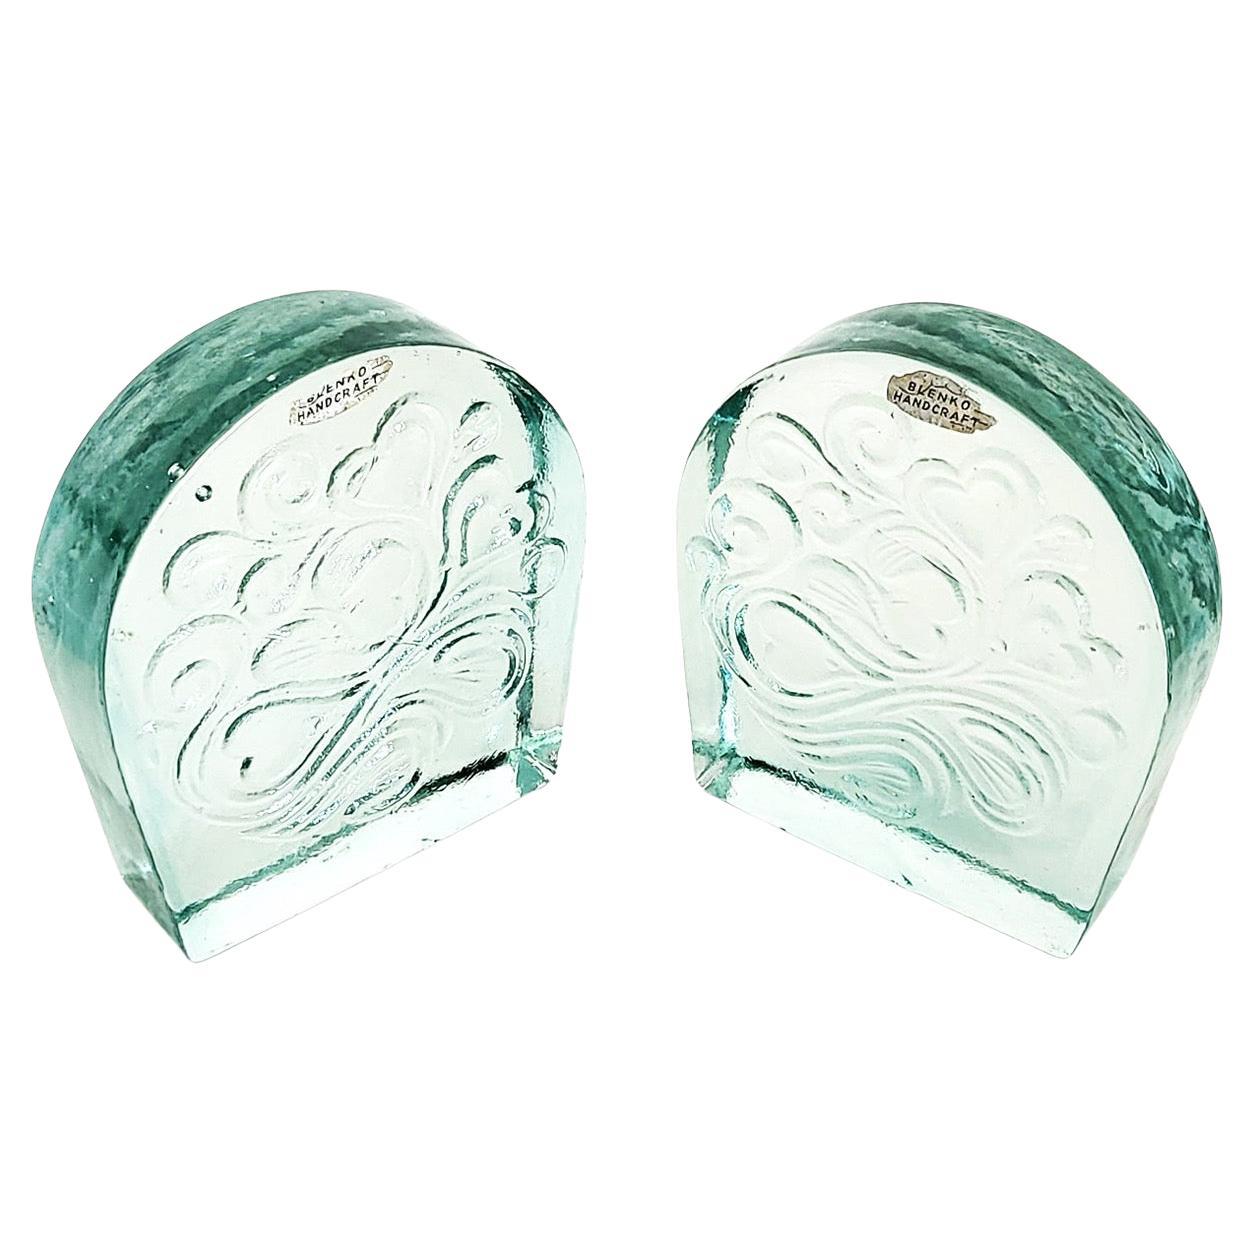 Blenko Glass Twisted Hearts Clear Block Bookends Wayne Husted, 1969 For Sale